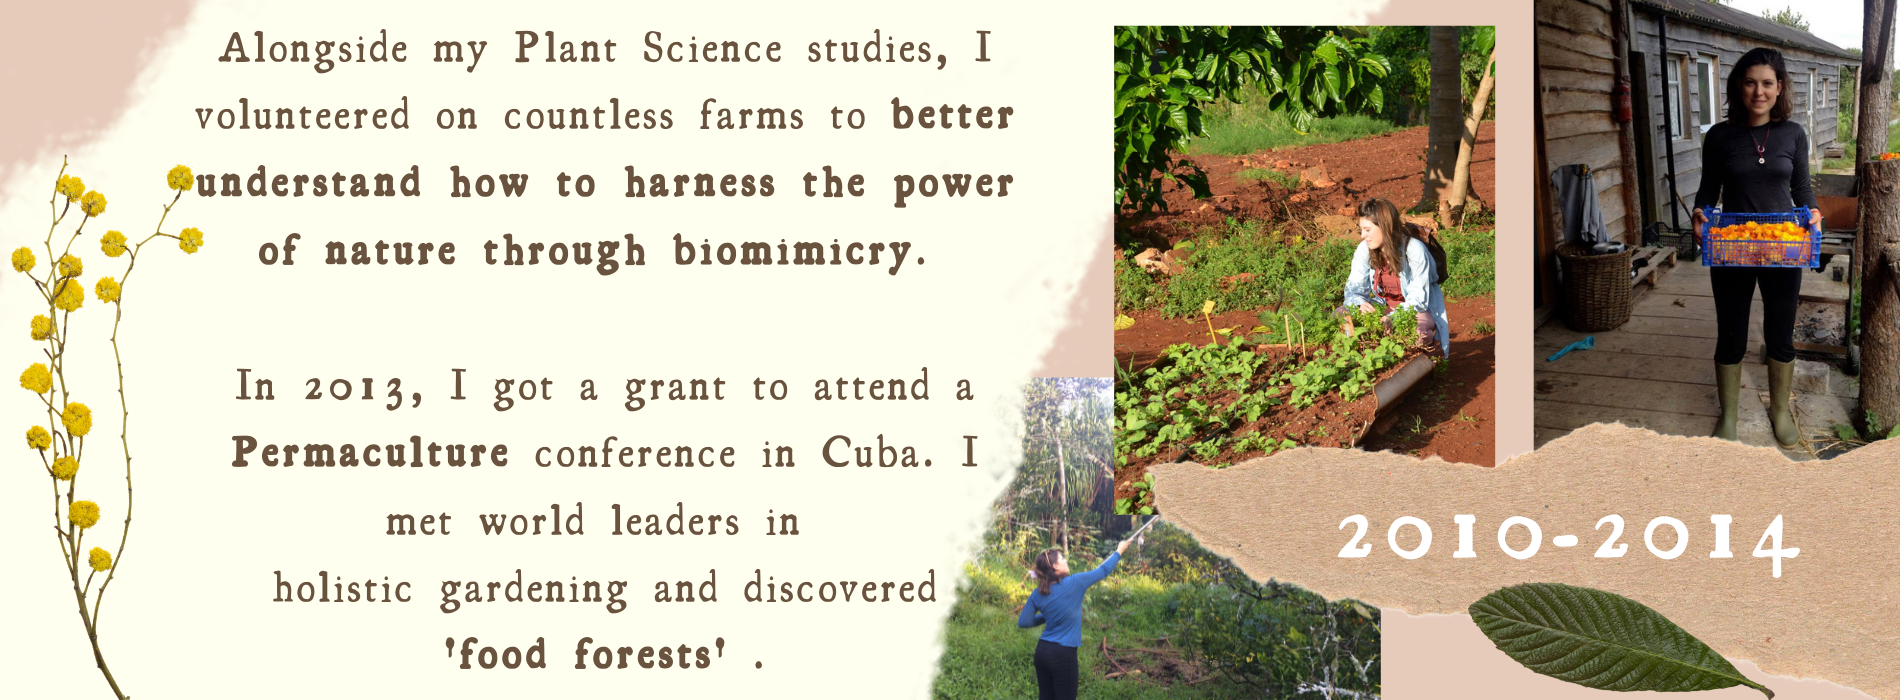 Alongside my Plant Science studies, I volunteered on countless farms to better understand how to harness the power of nature through biomimicry.   In 2013, I got a grant to attend a Permaculture conference in Cuba. I met world leaders in  holistic gardening and discovered  'food forests' . 